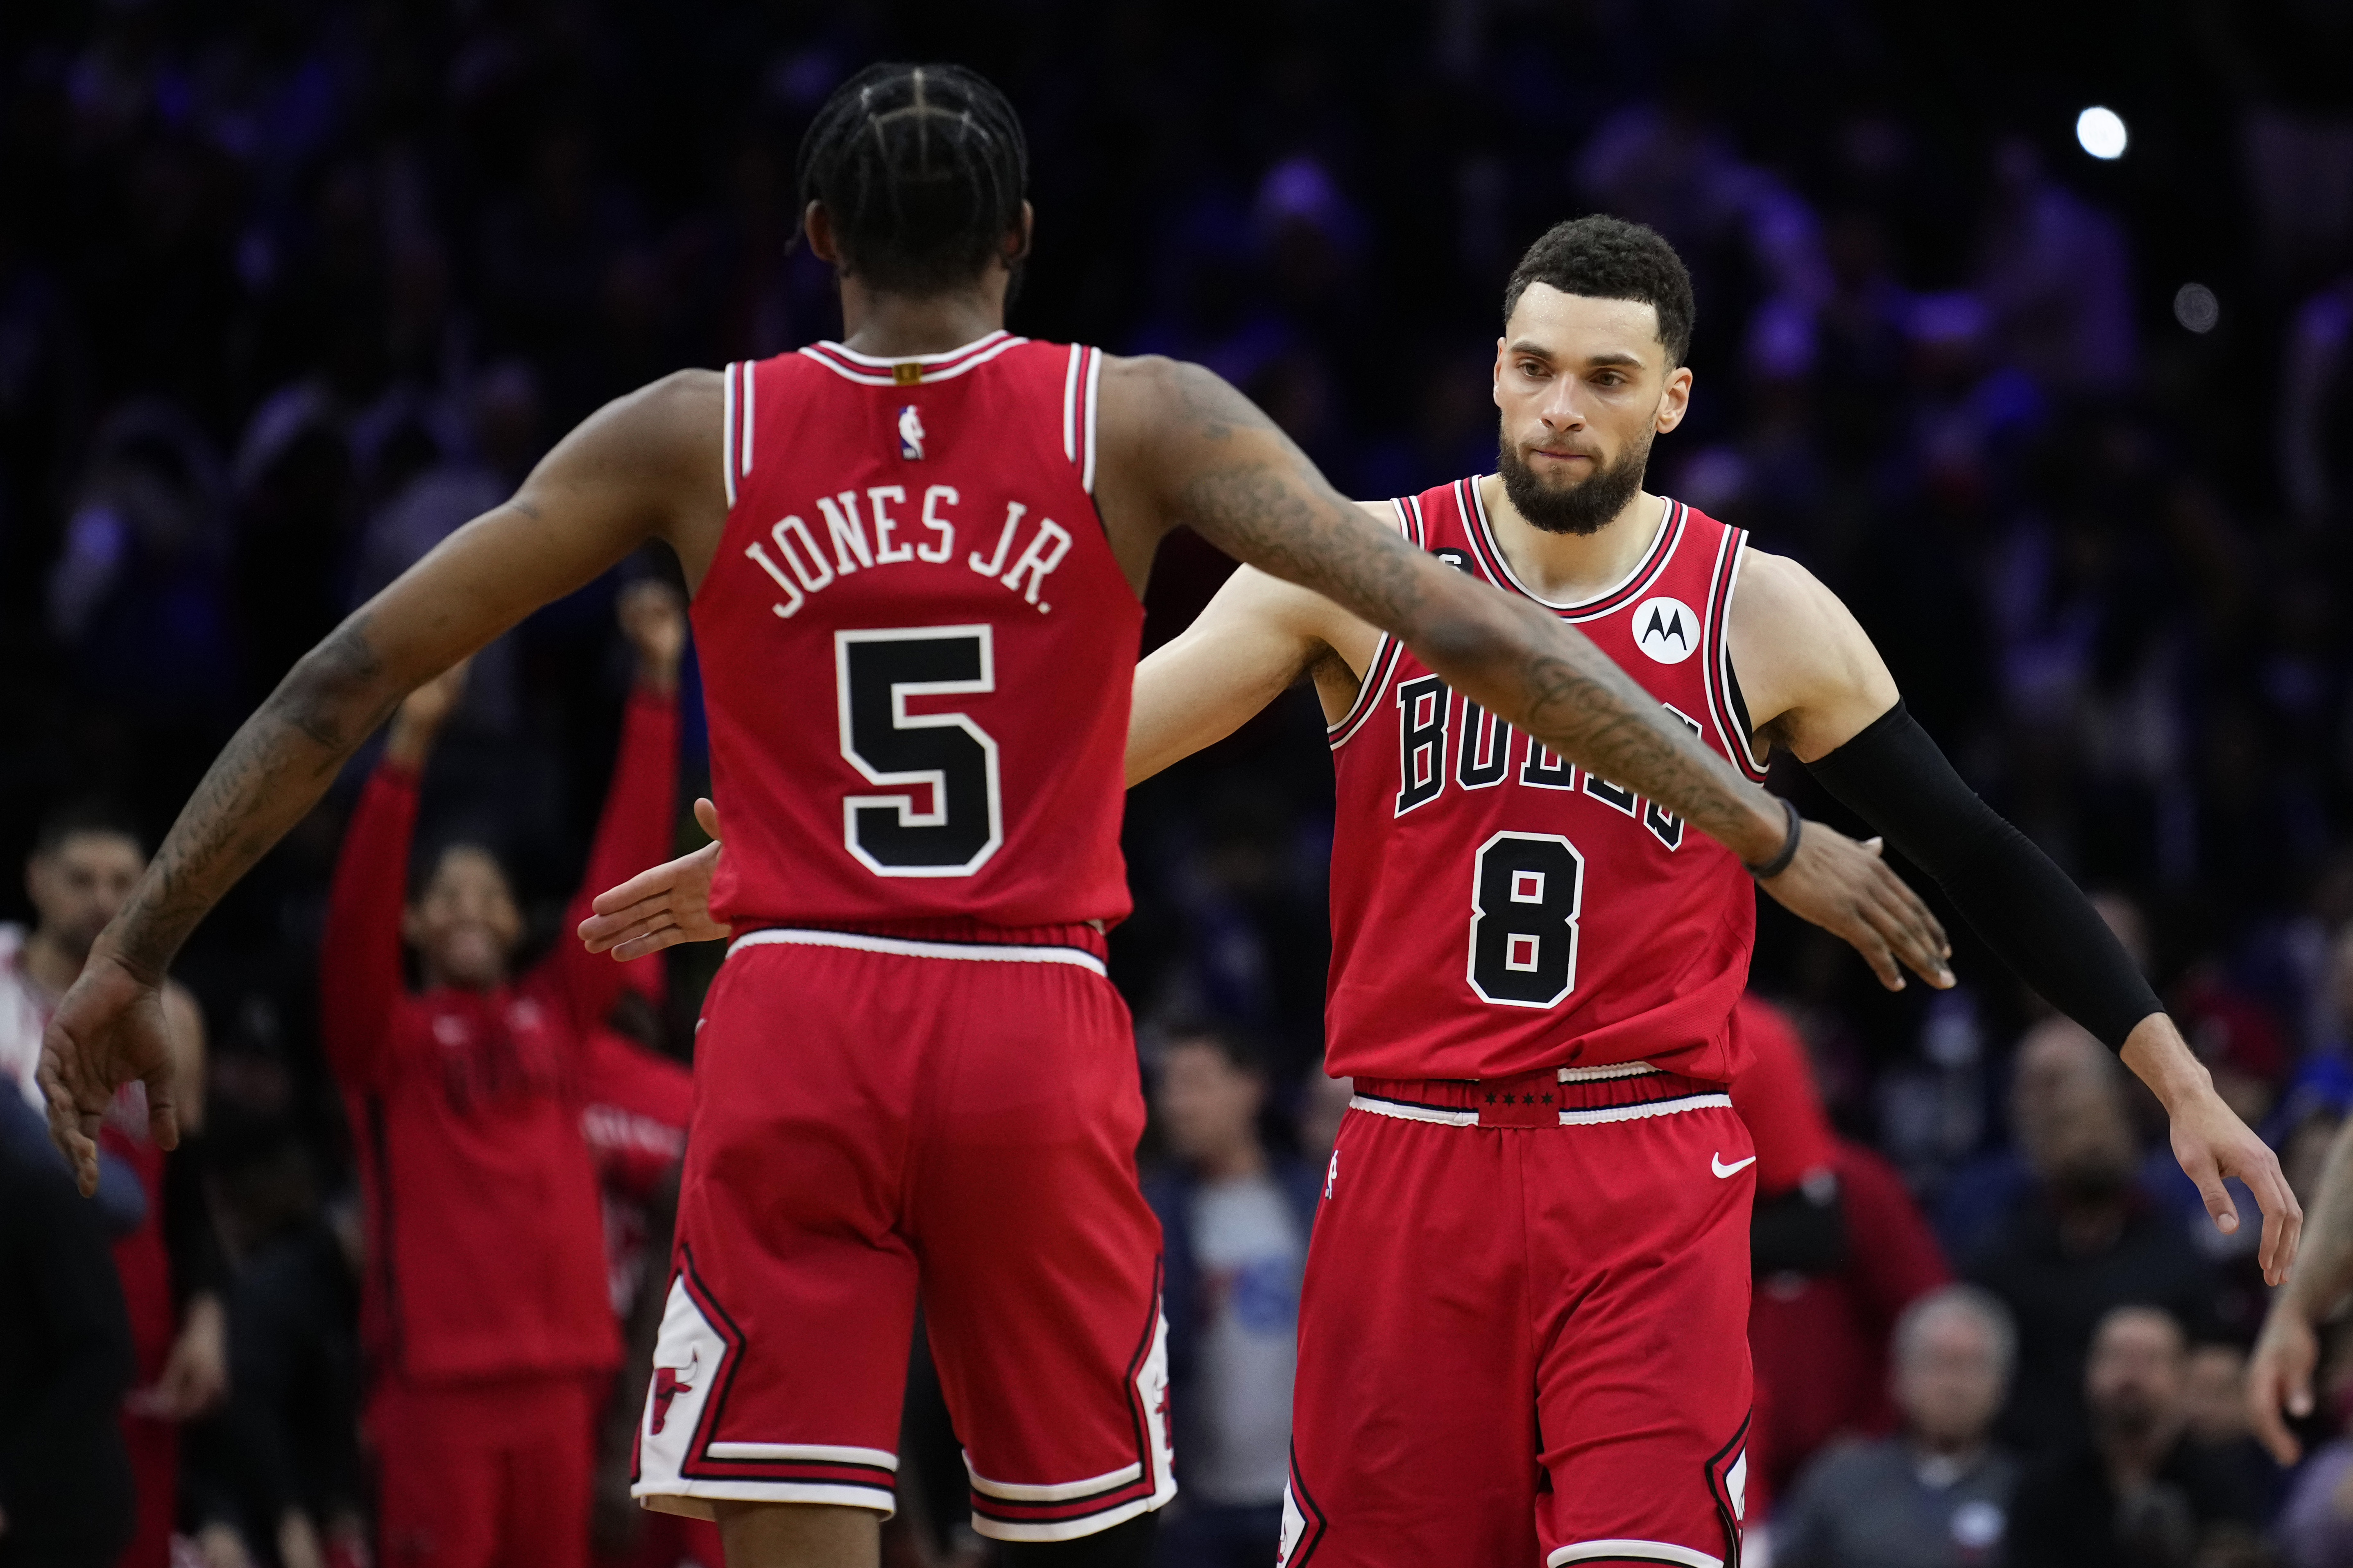 Thoughts on which numbers should be retired or not? : r/chicagobulls